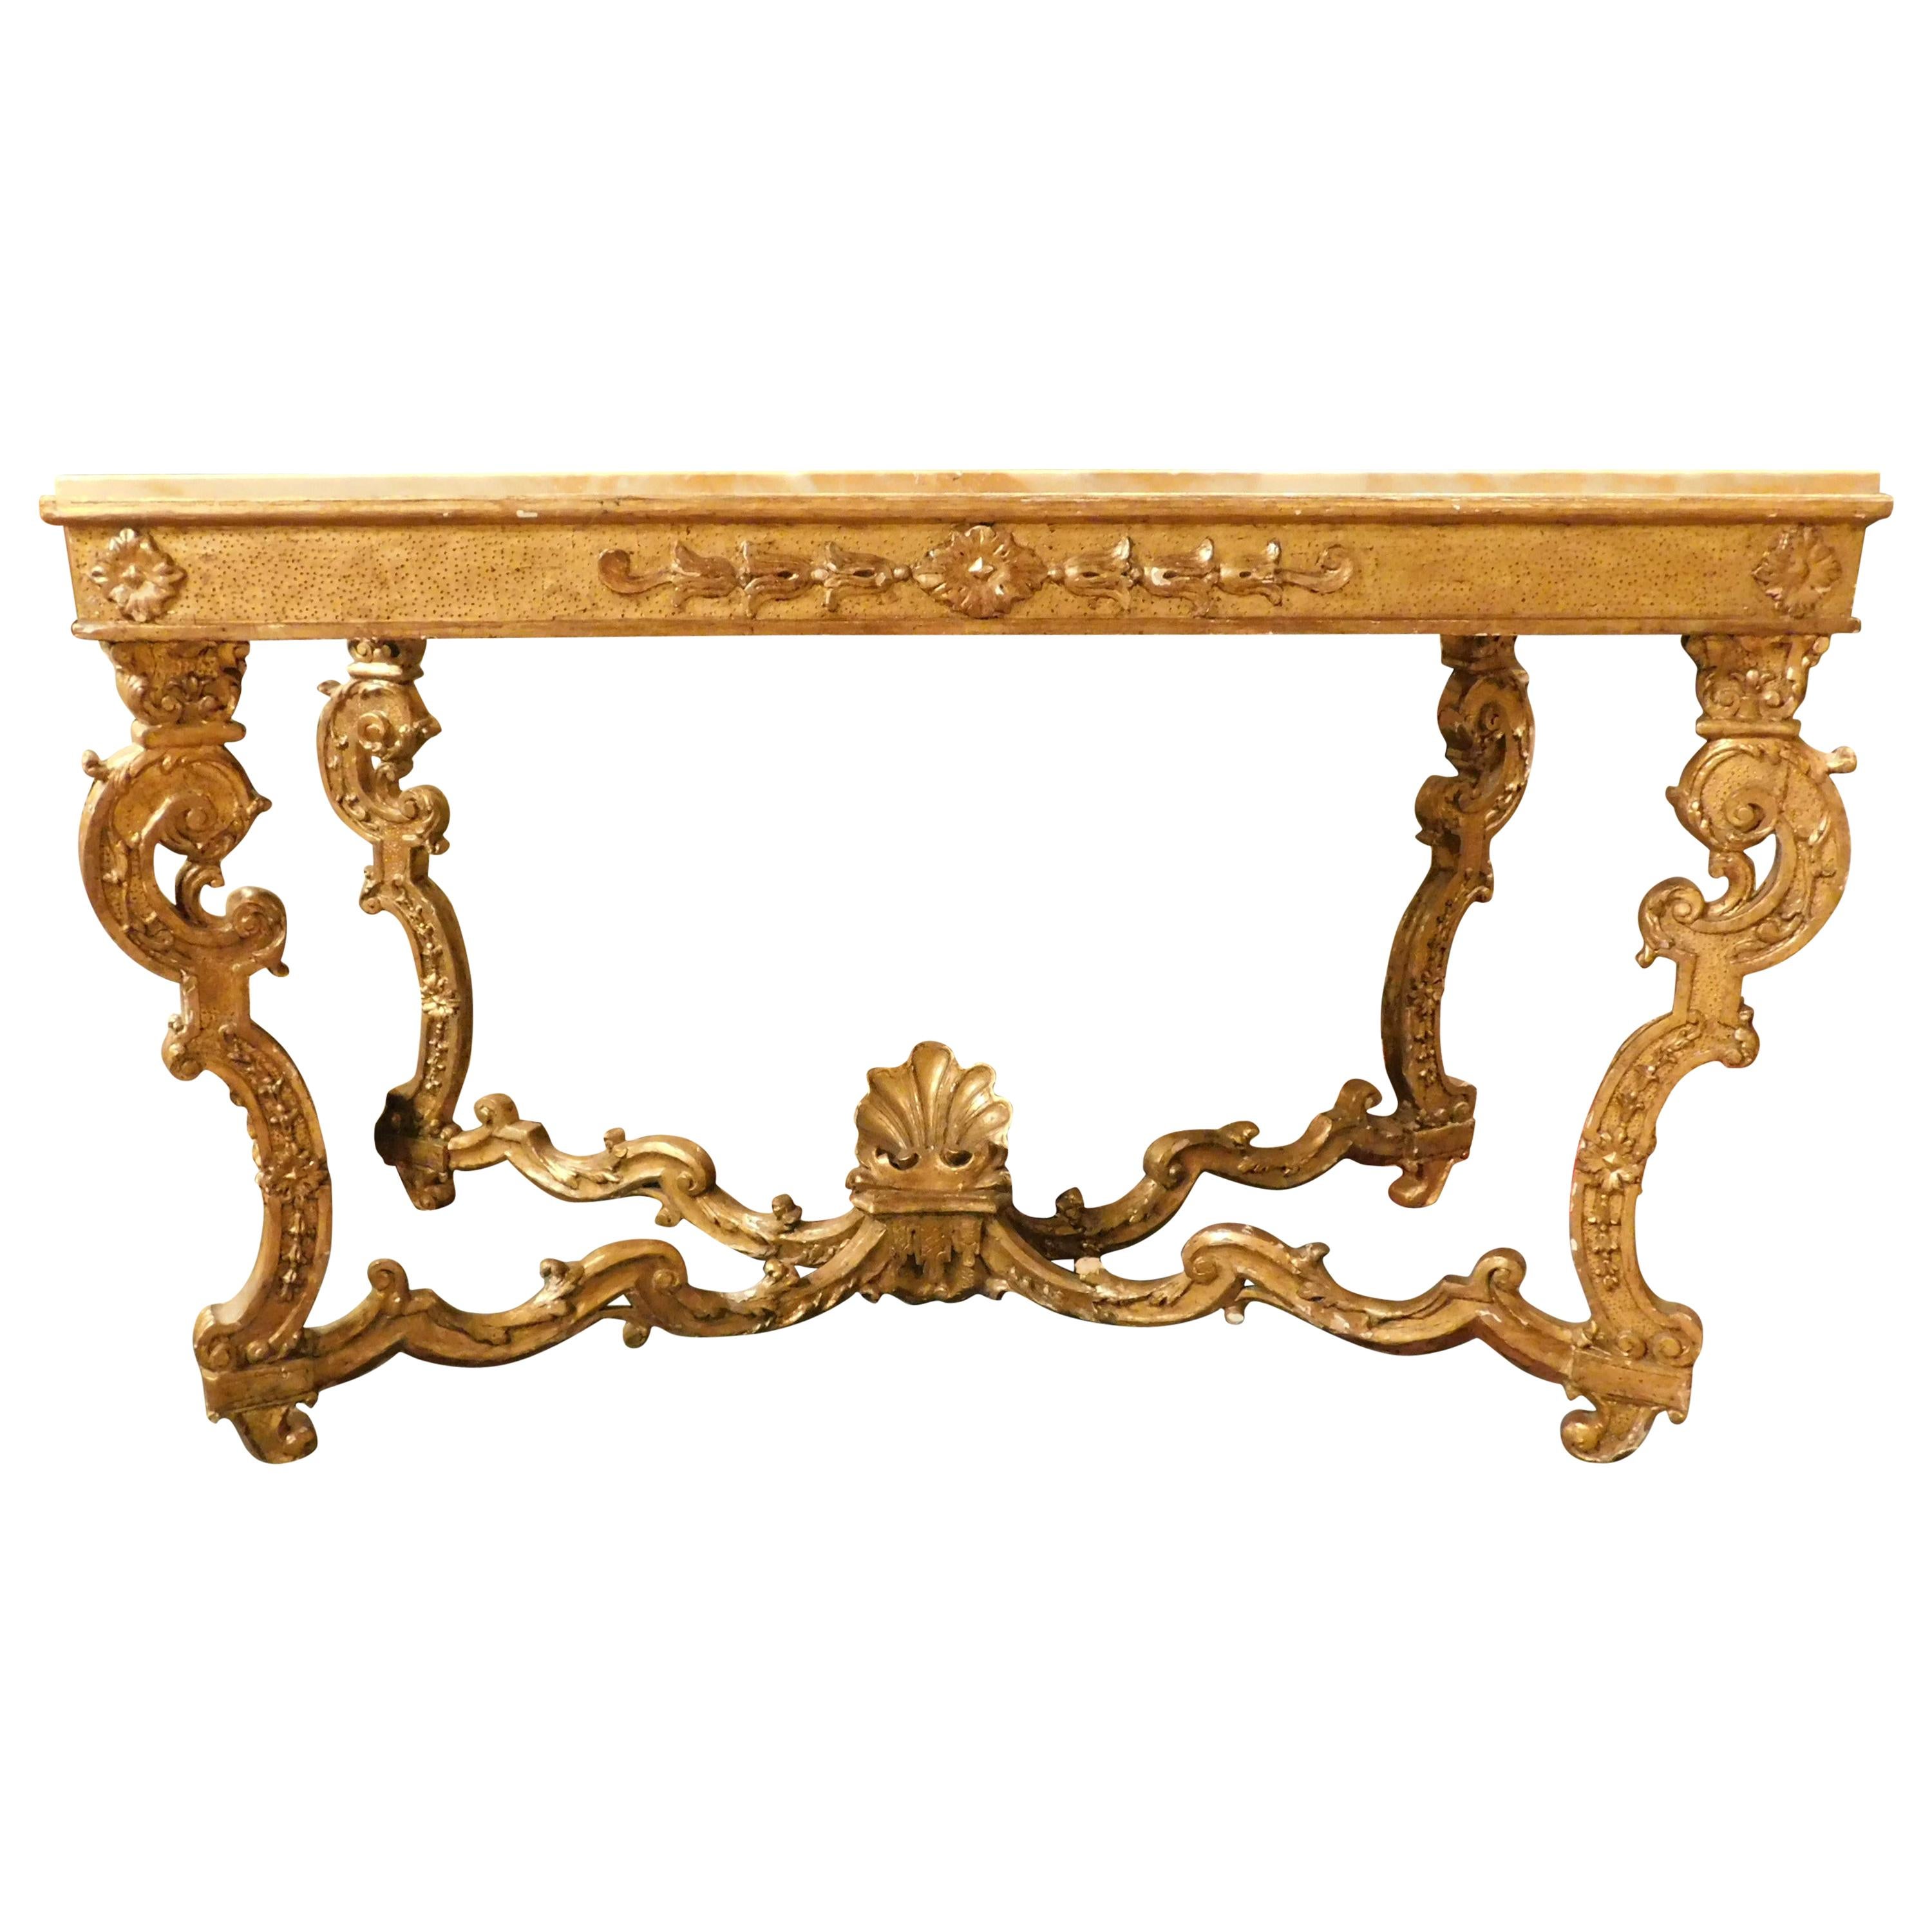 Antique Wood Golden Console Table with Marble Top, 18th Century Naples, Italy